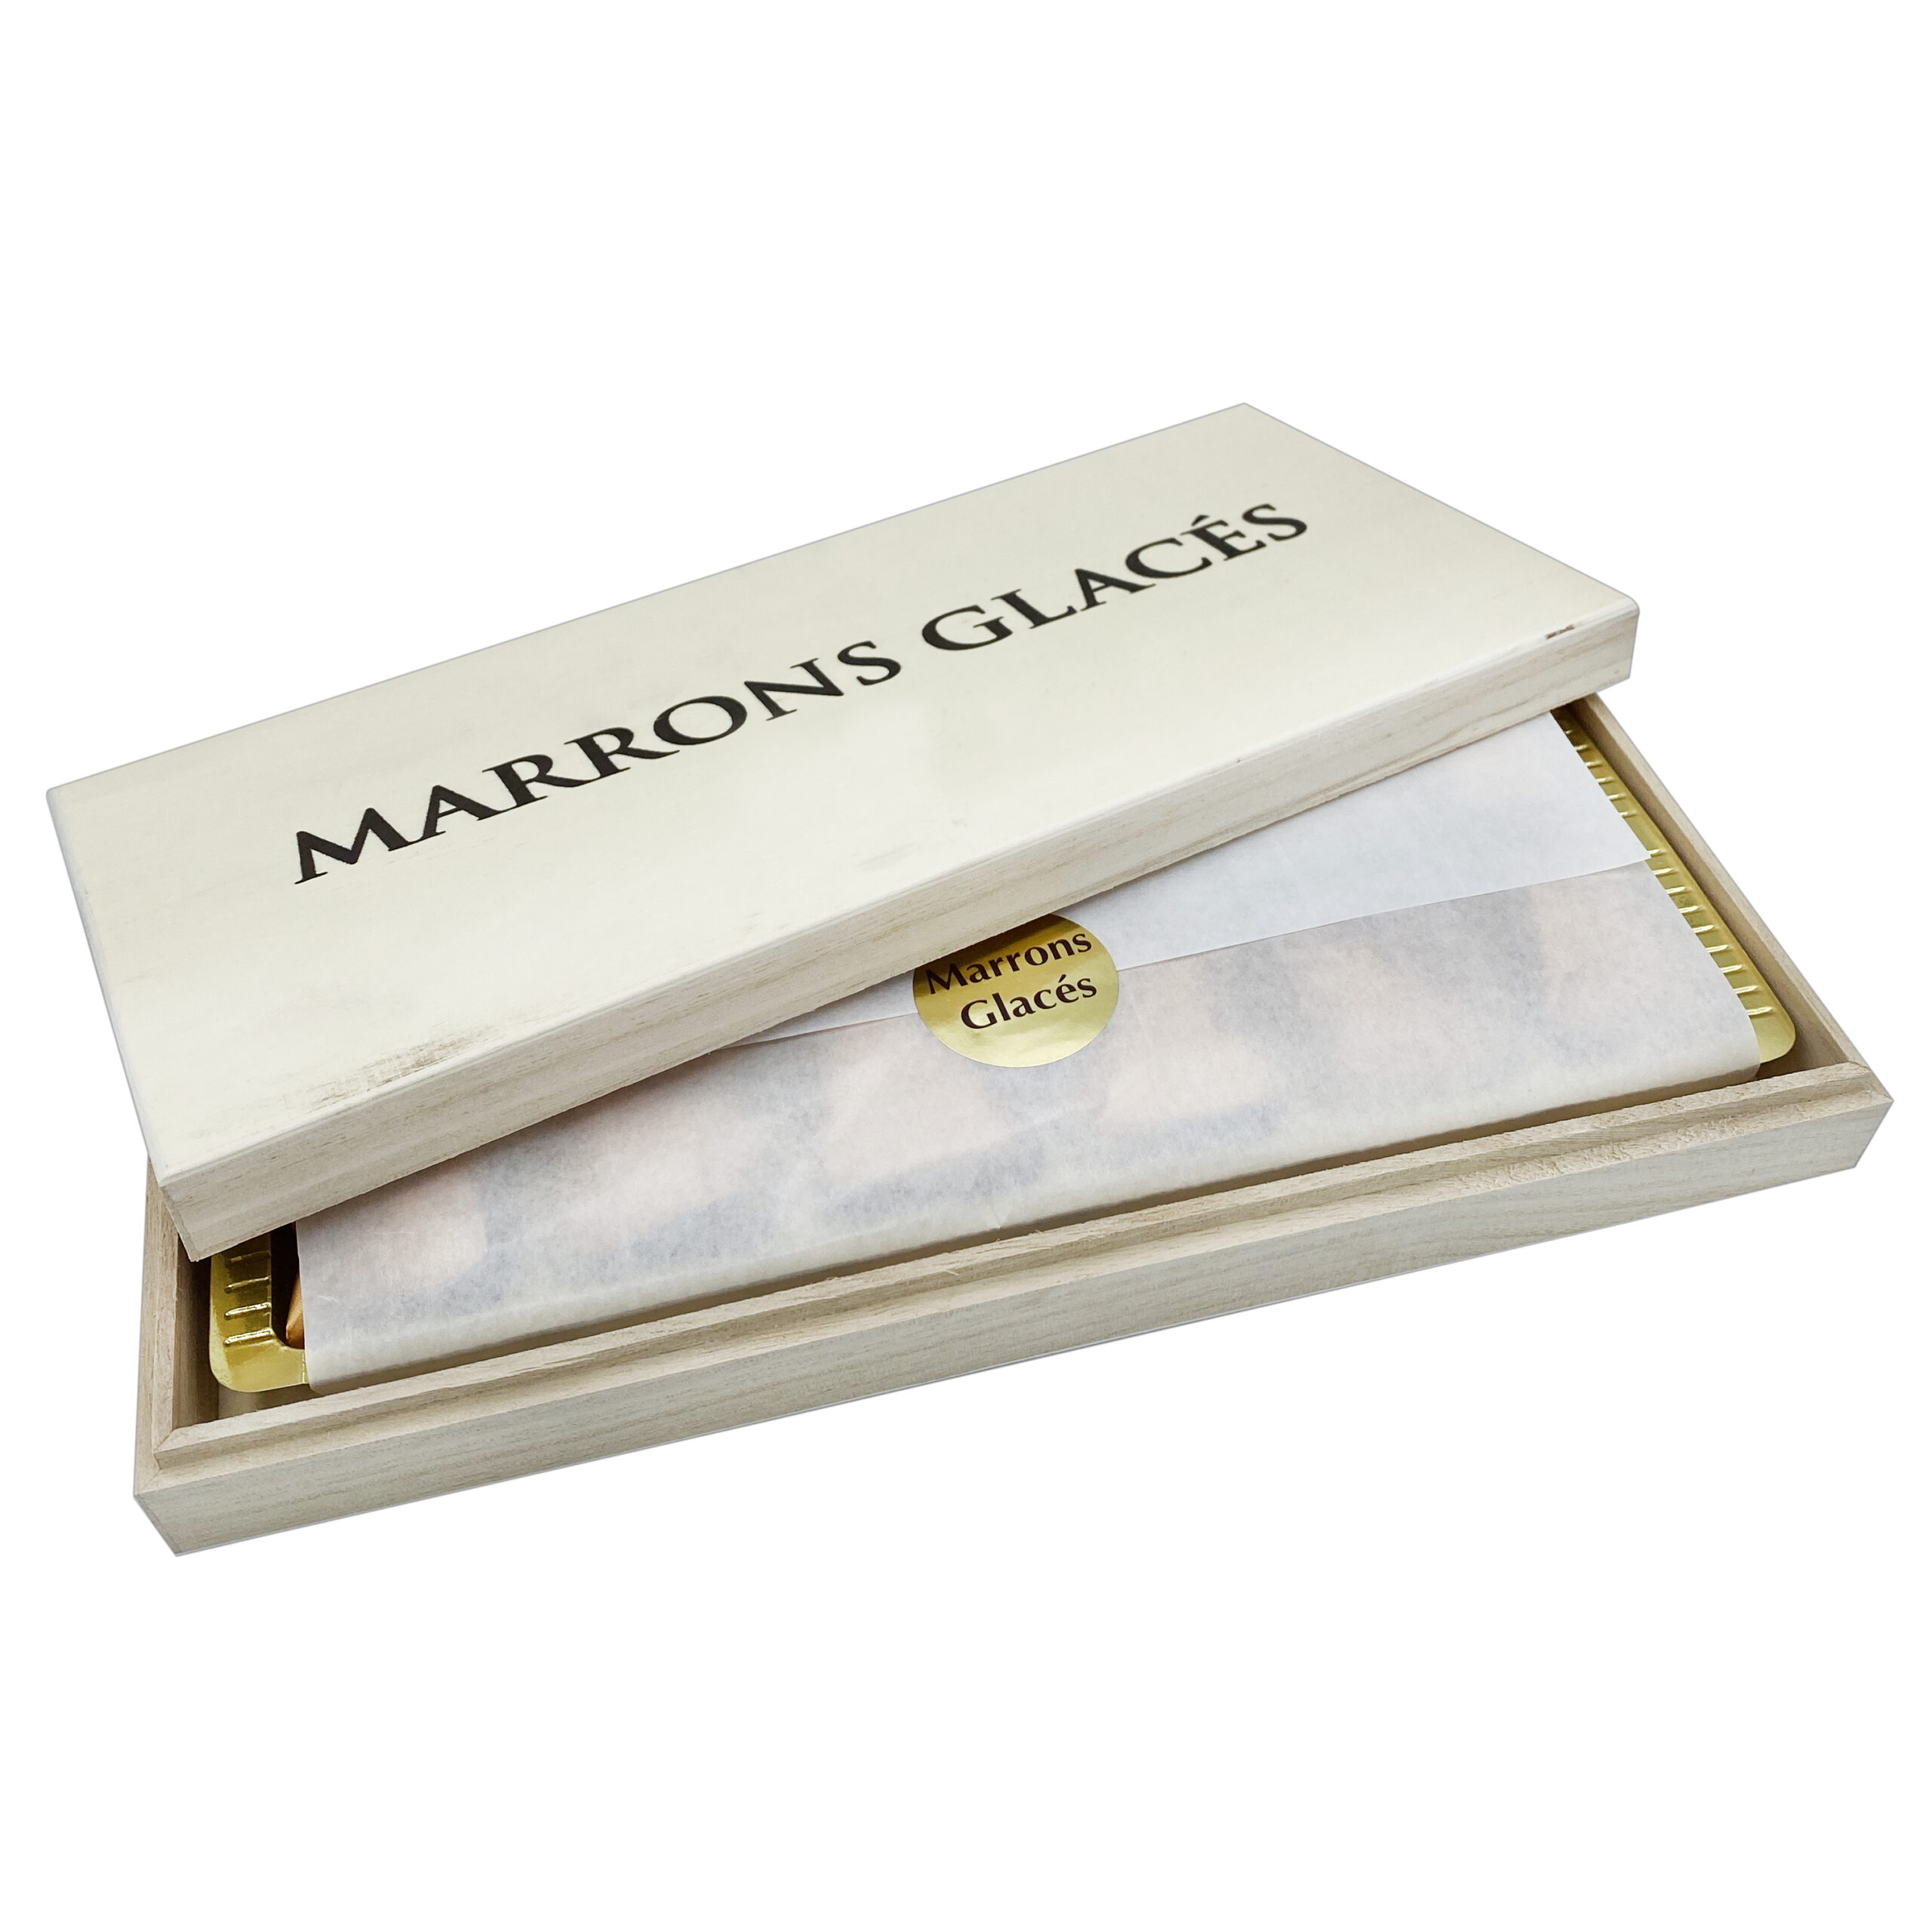 Premium Marron Glacé - Candied Chestnut 8 Pieces in a Gift in Box - 160  Grams. Made in France by L'artisan Provencal